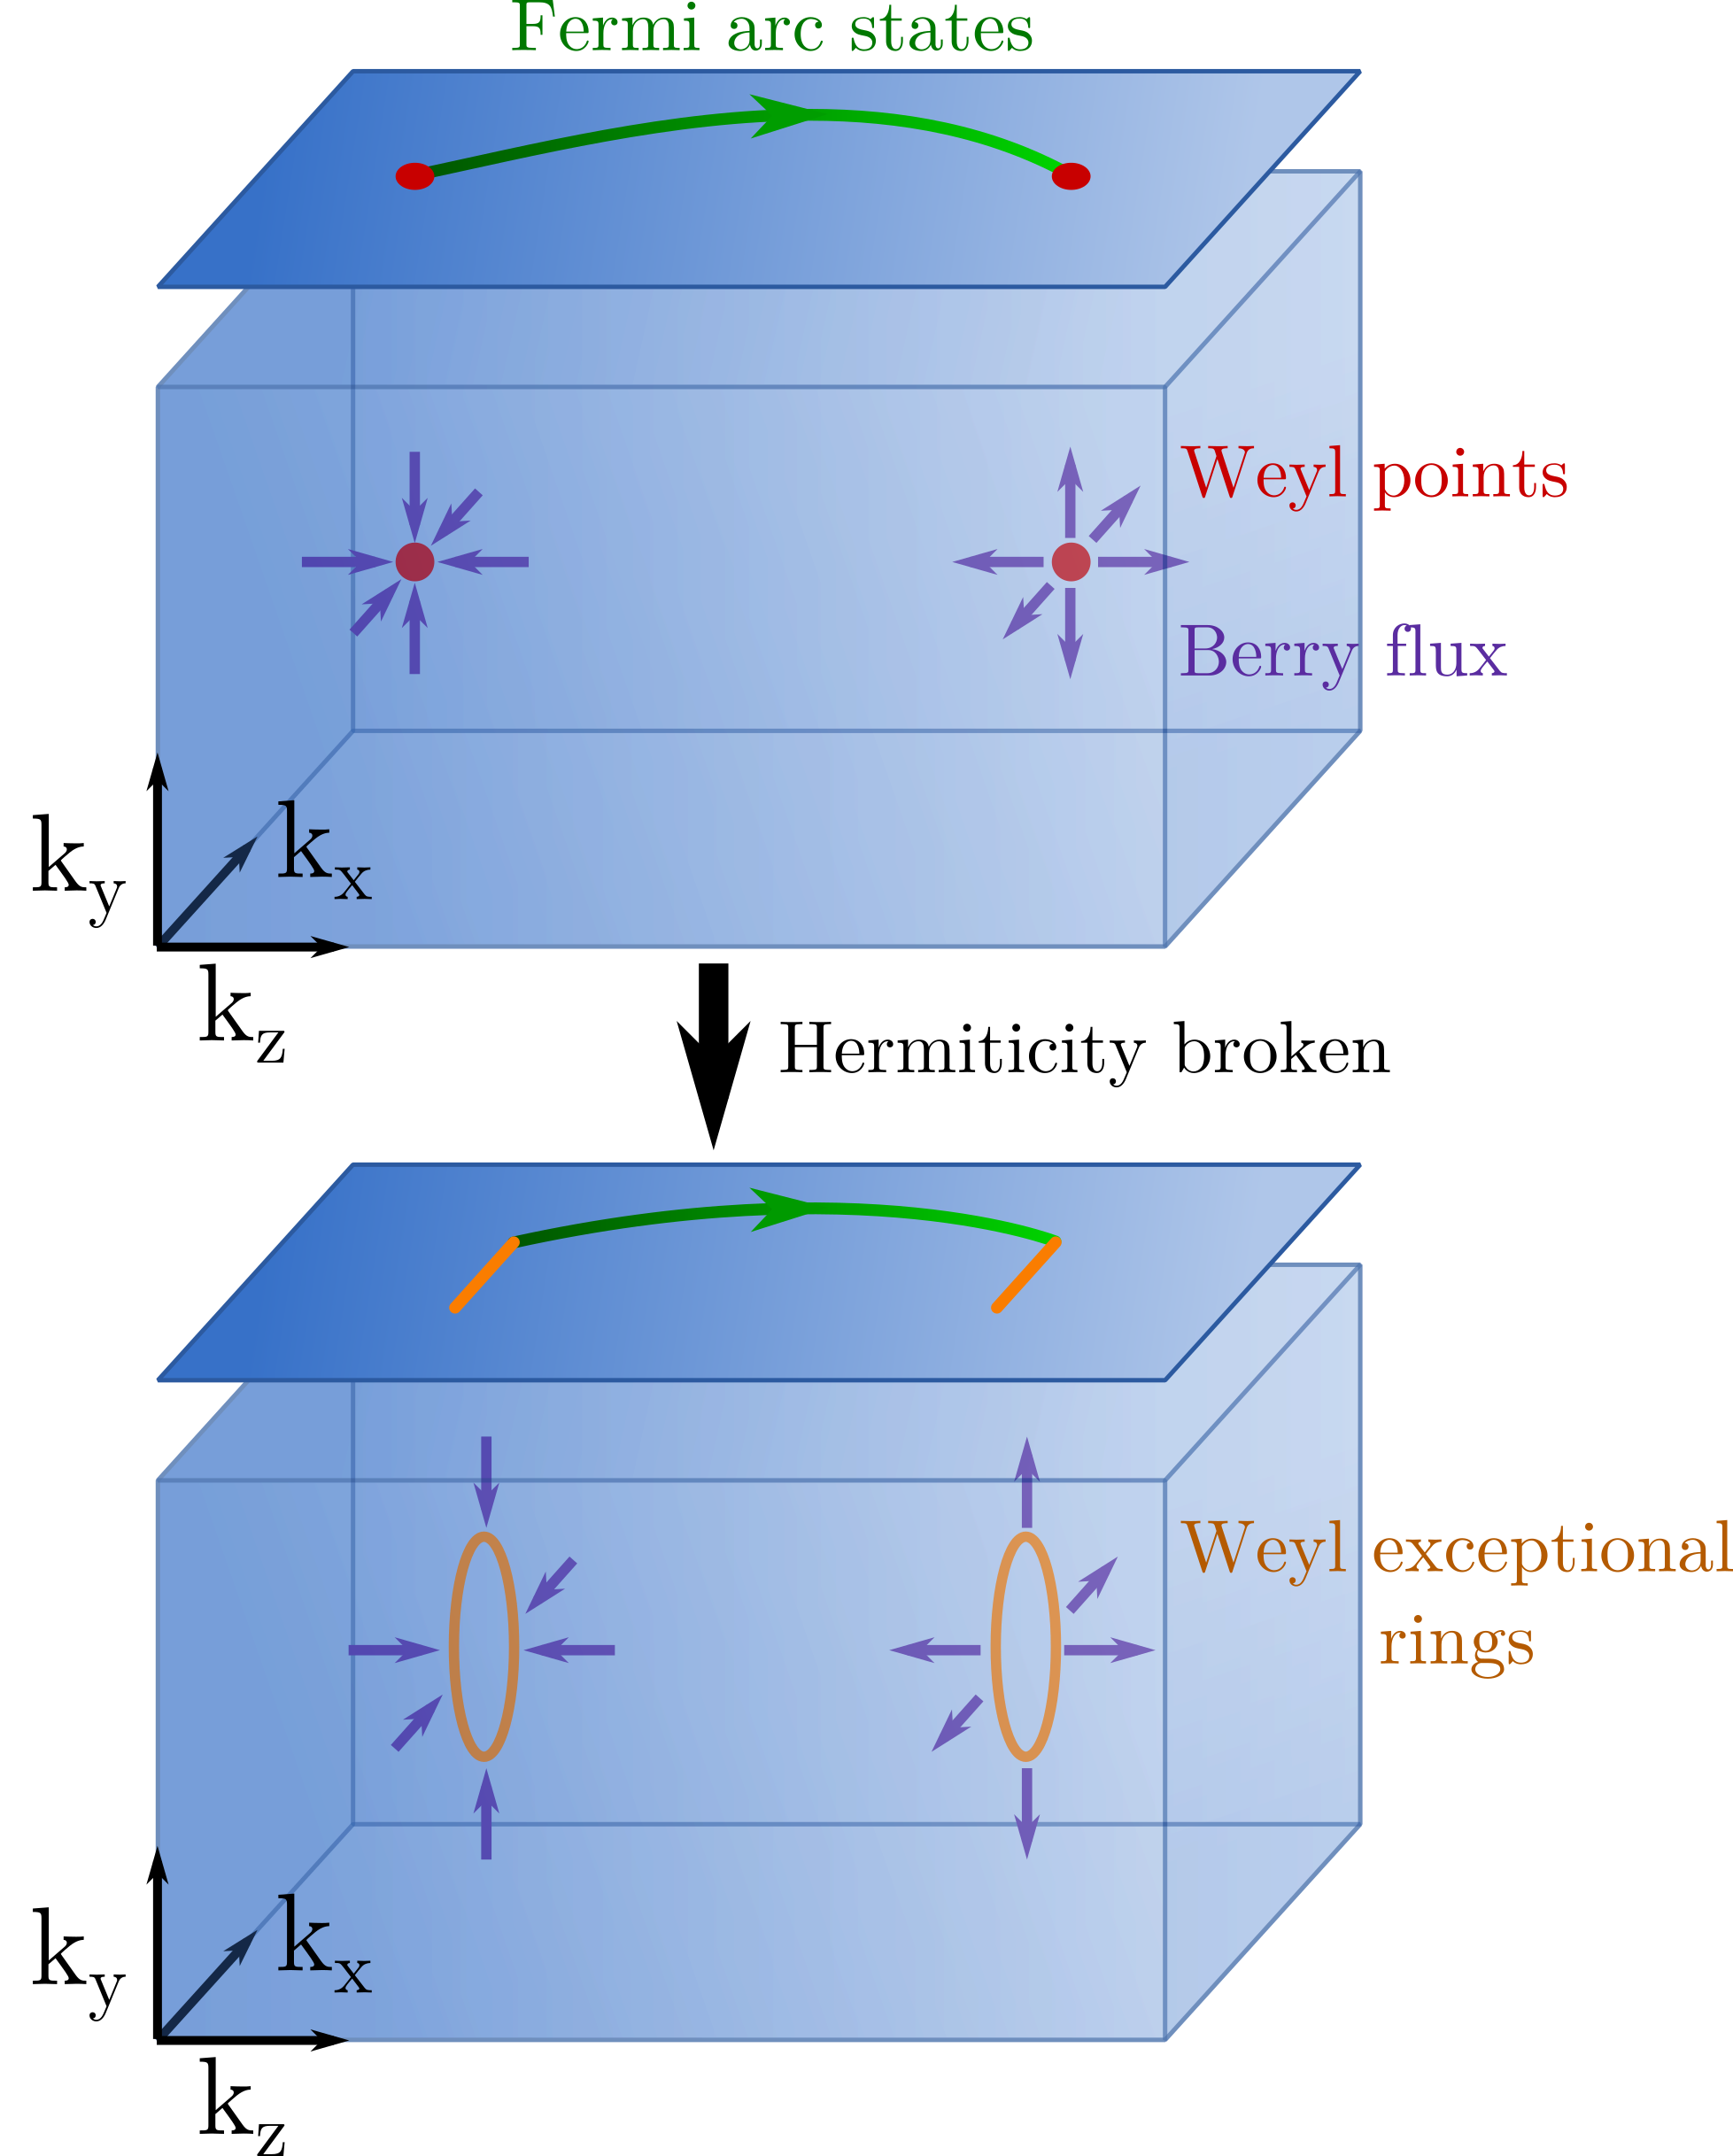 Formation of Weyl exceptional rings.